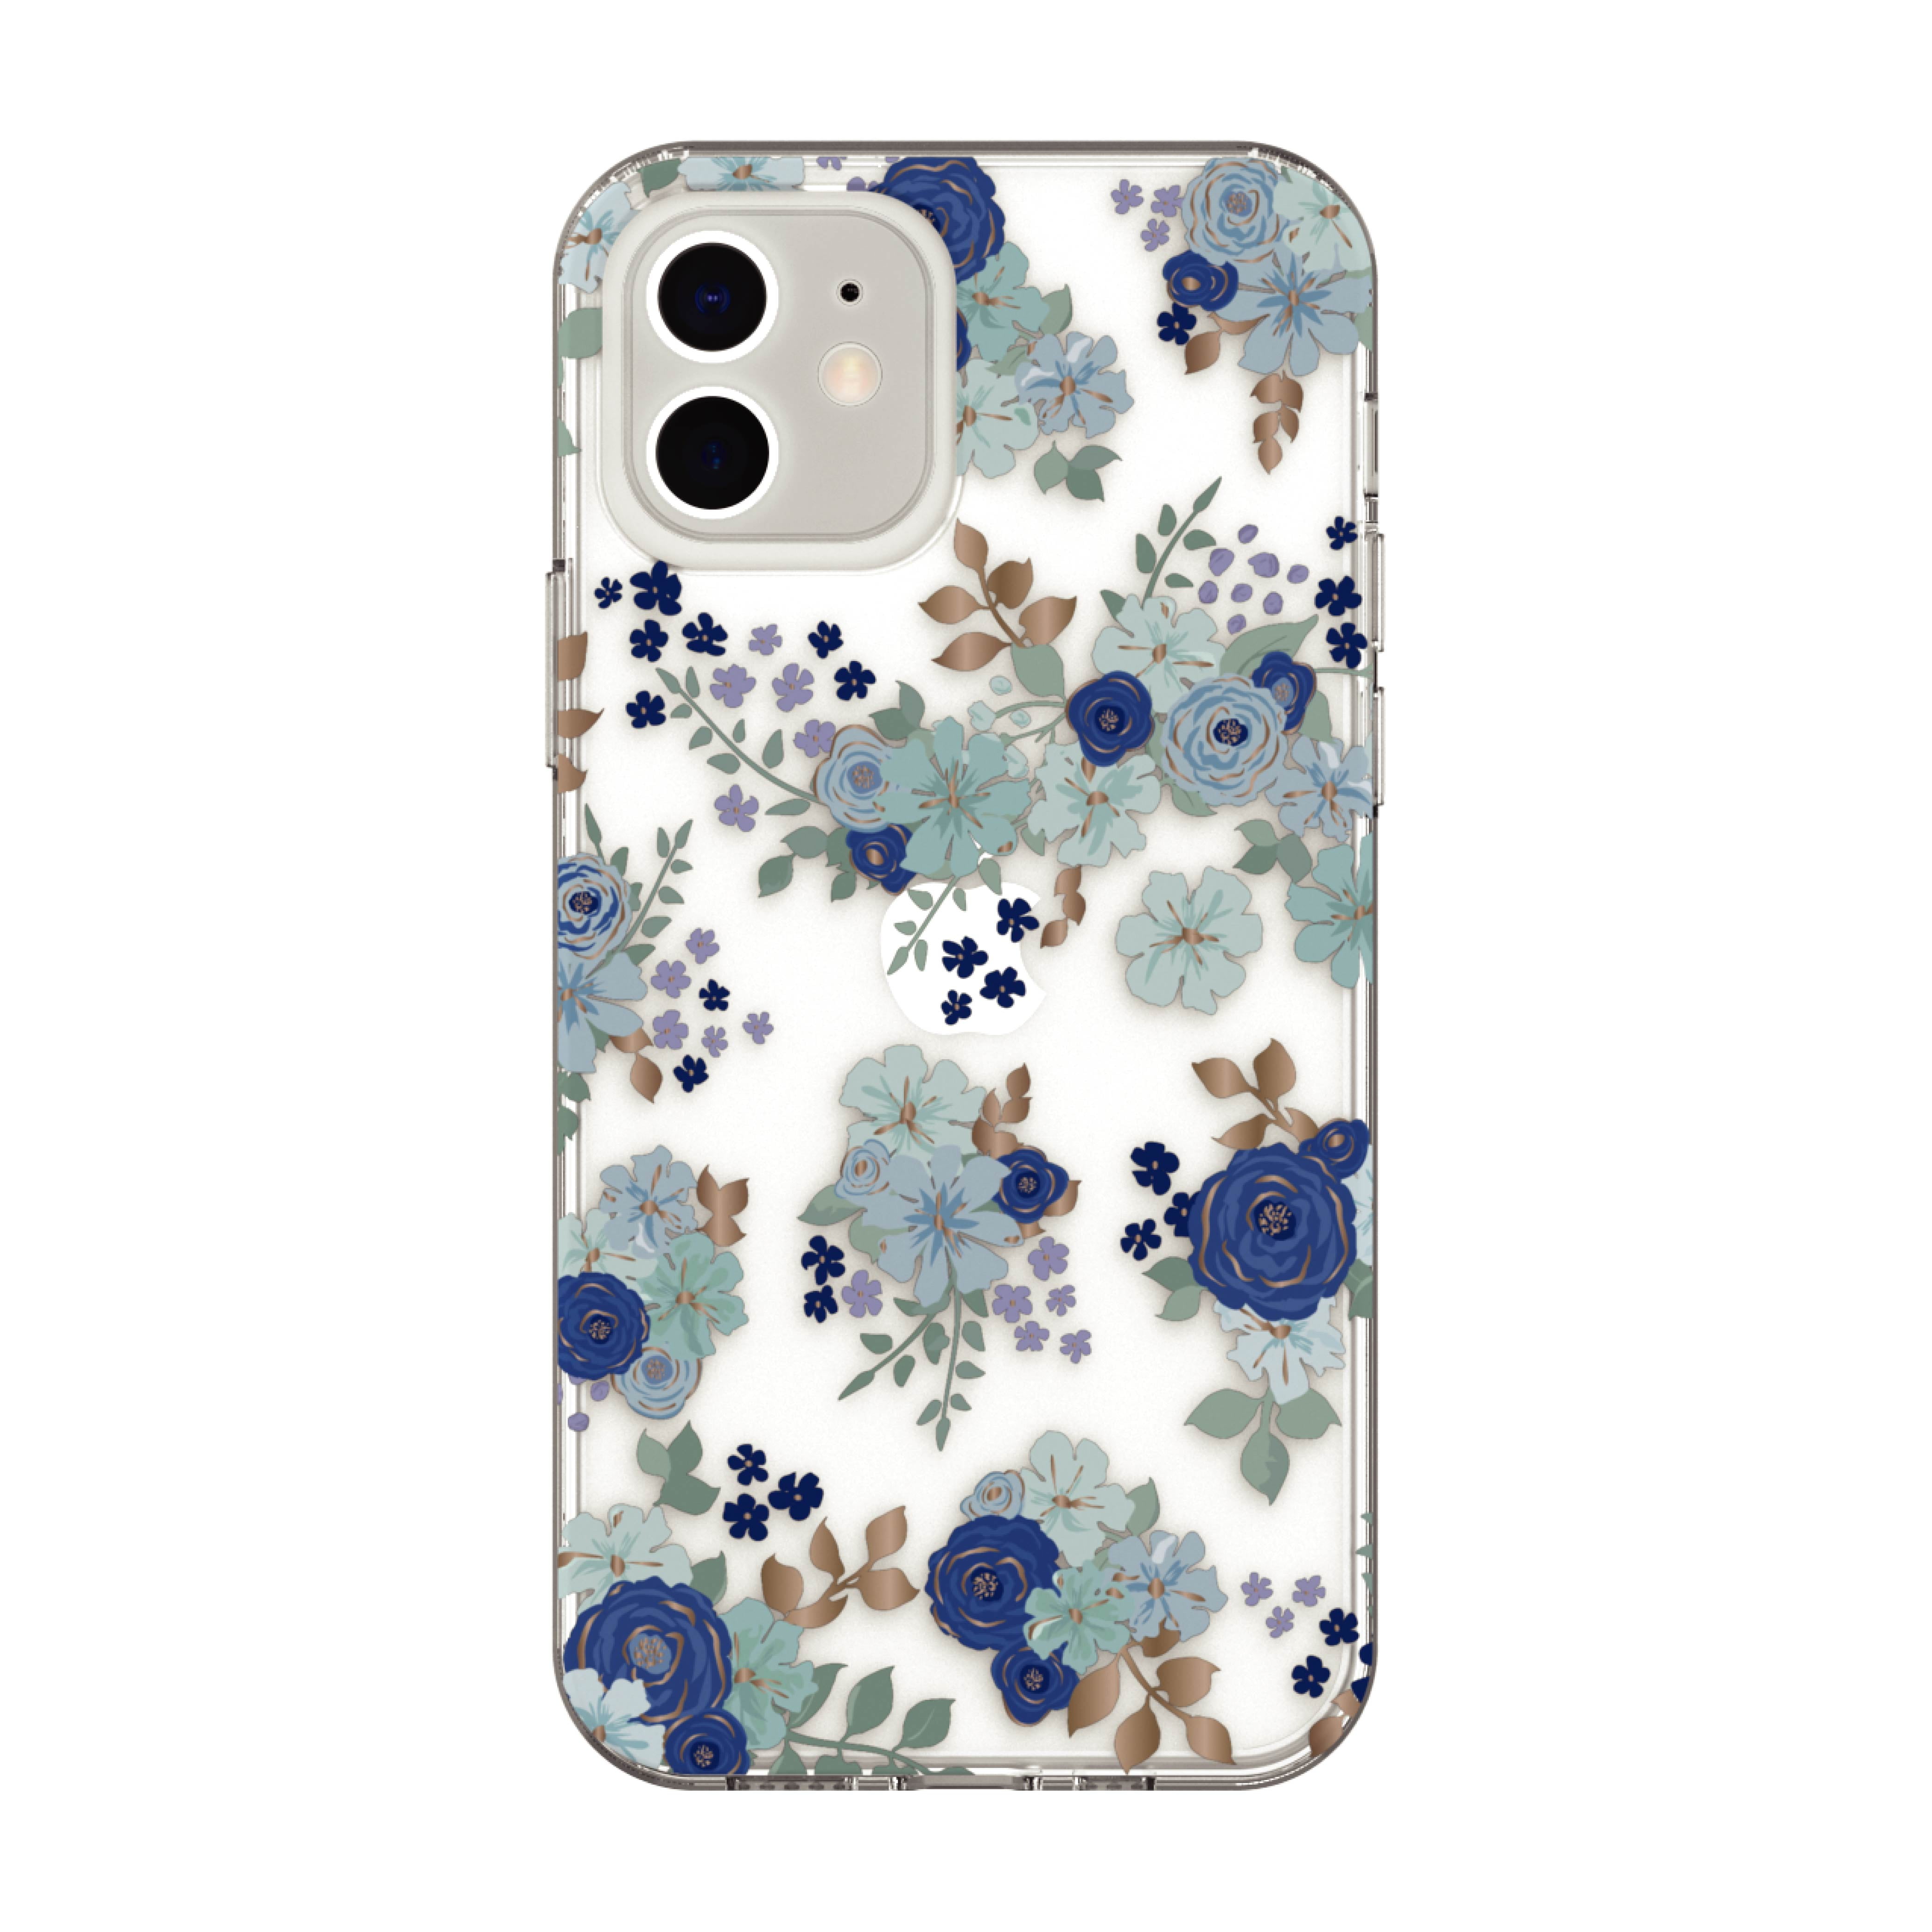 onn. Fashion Phone Case for iPhone 12, 12 Pro, Blue Floral